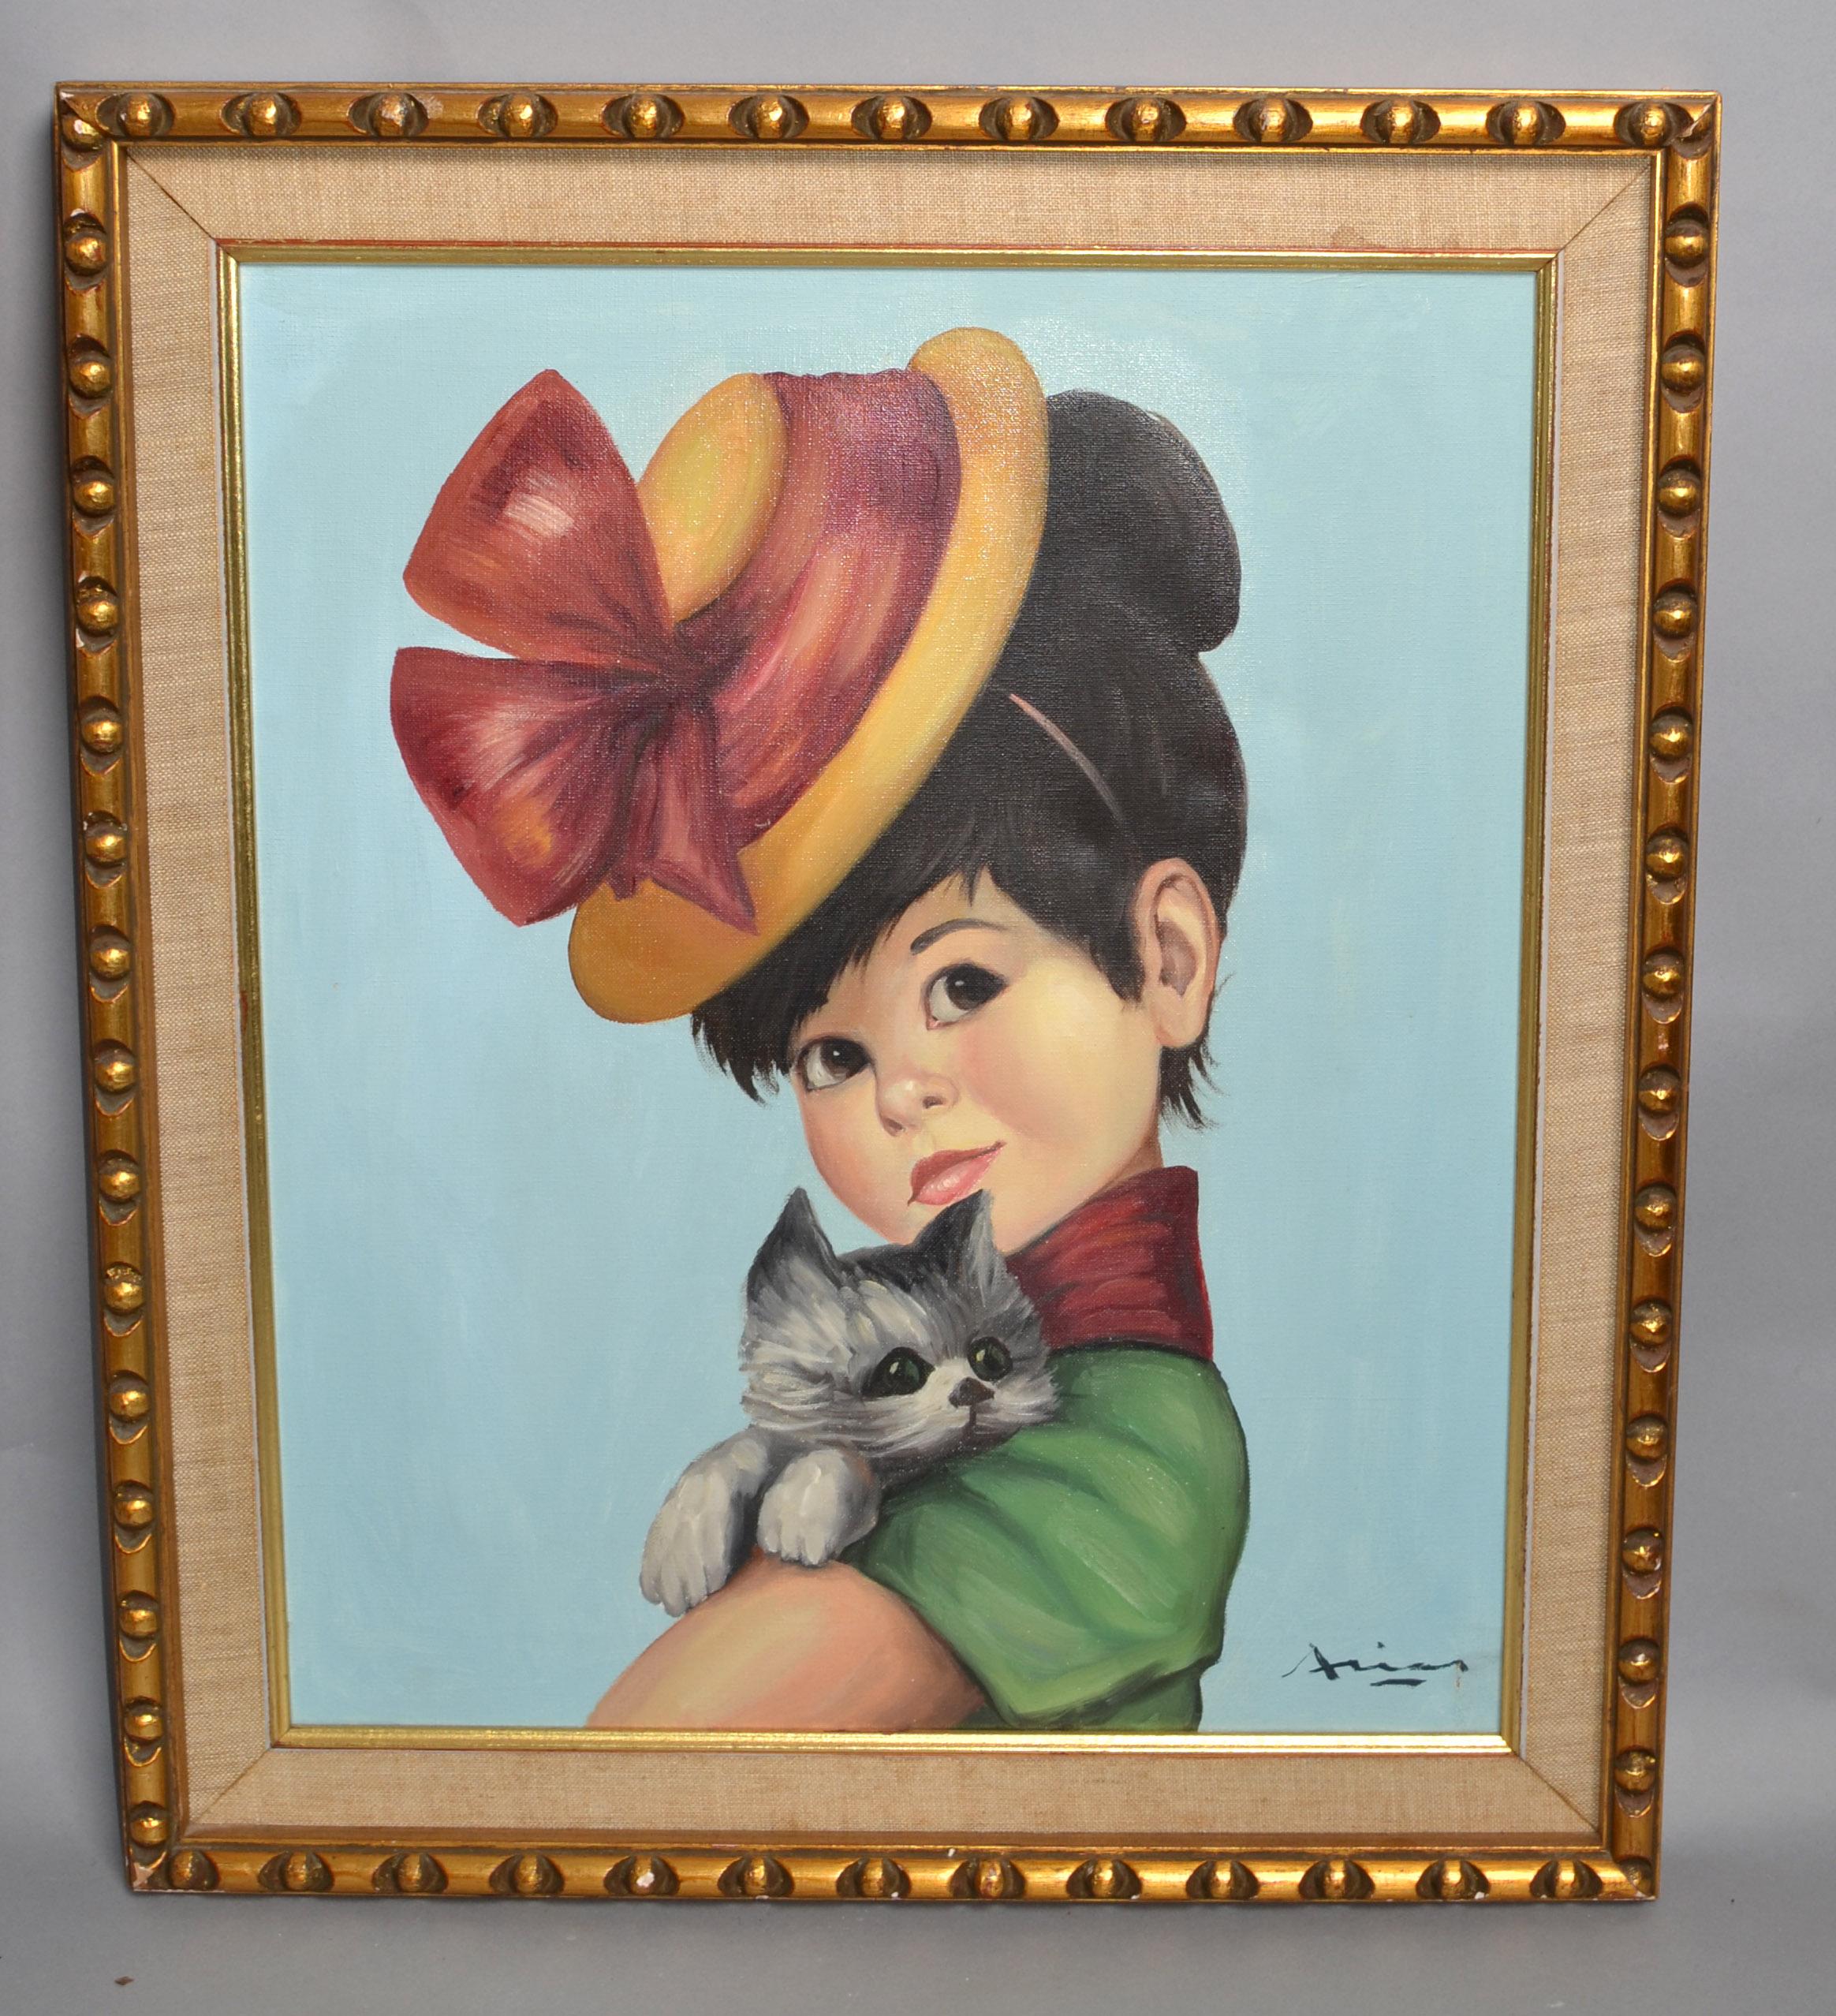 Regency Carved Gilt Framed Spanish Girl and Gray Cat Painting Acrylic on Canvas For Sale 5